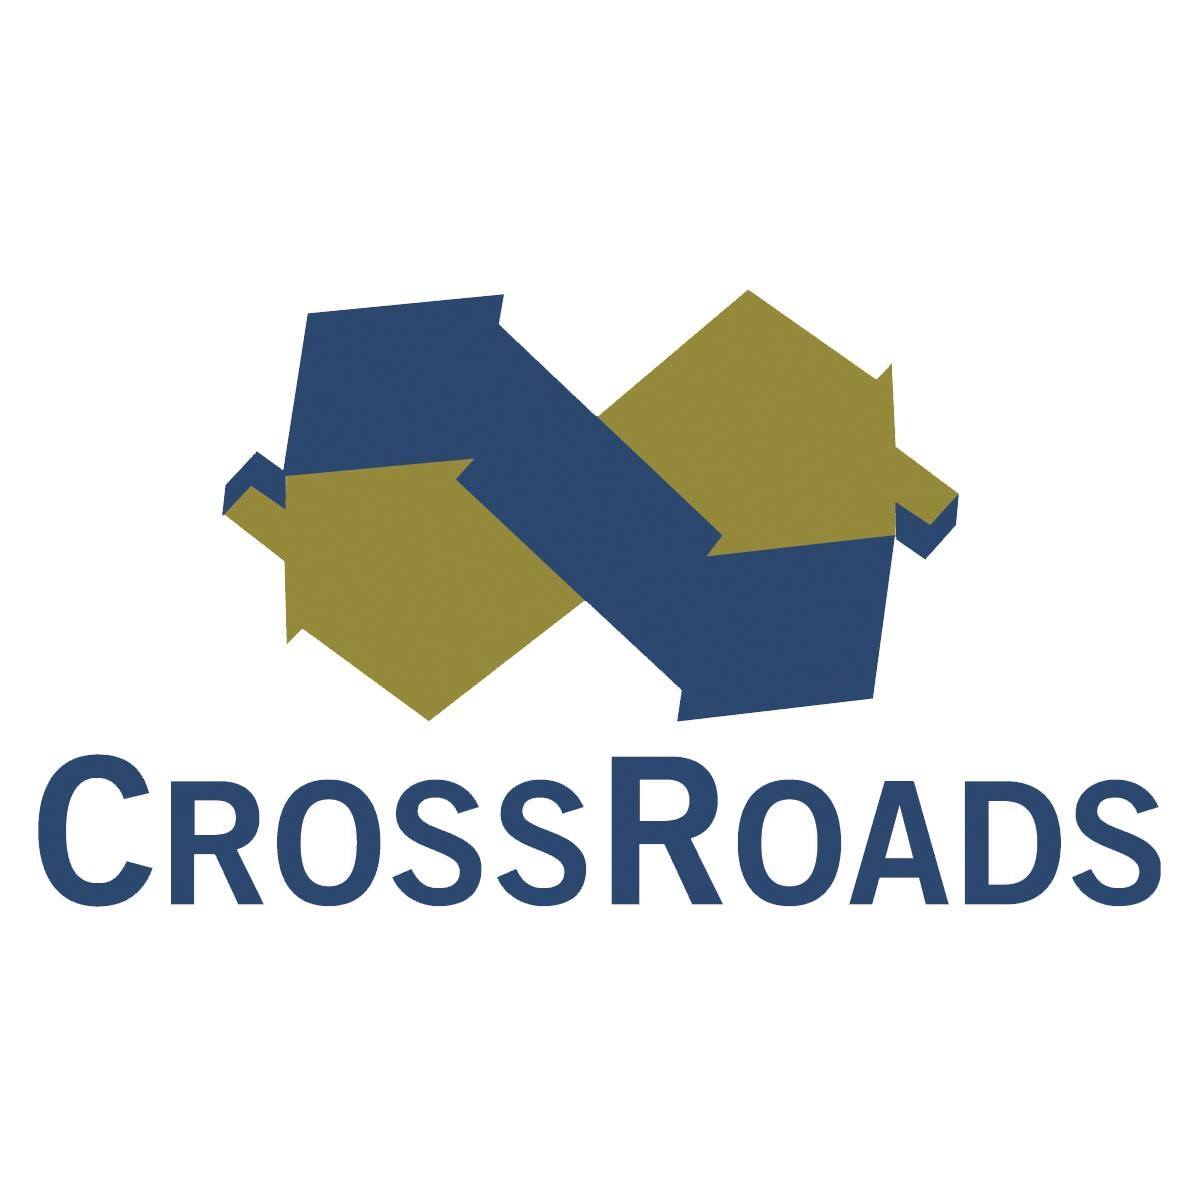 CrossRoads Corporation for Affordable Housing and Community Development logo